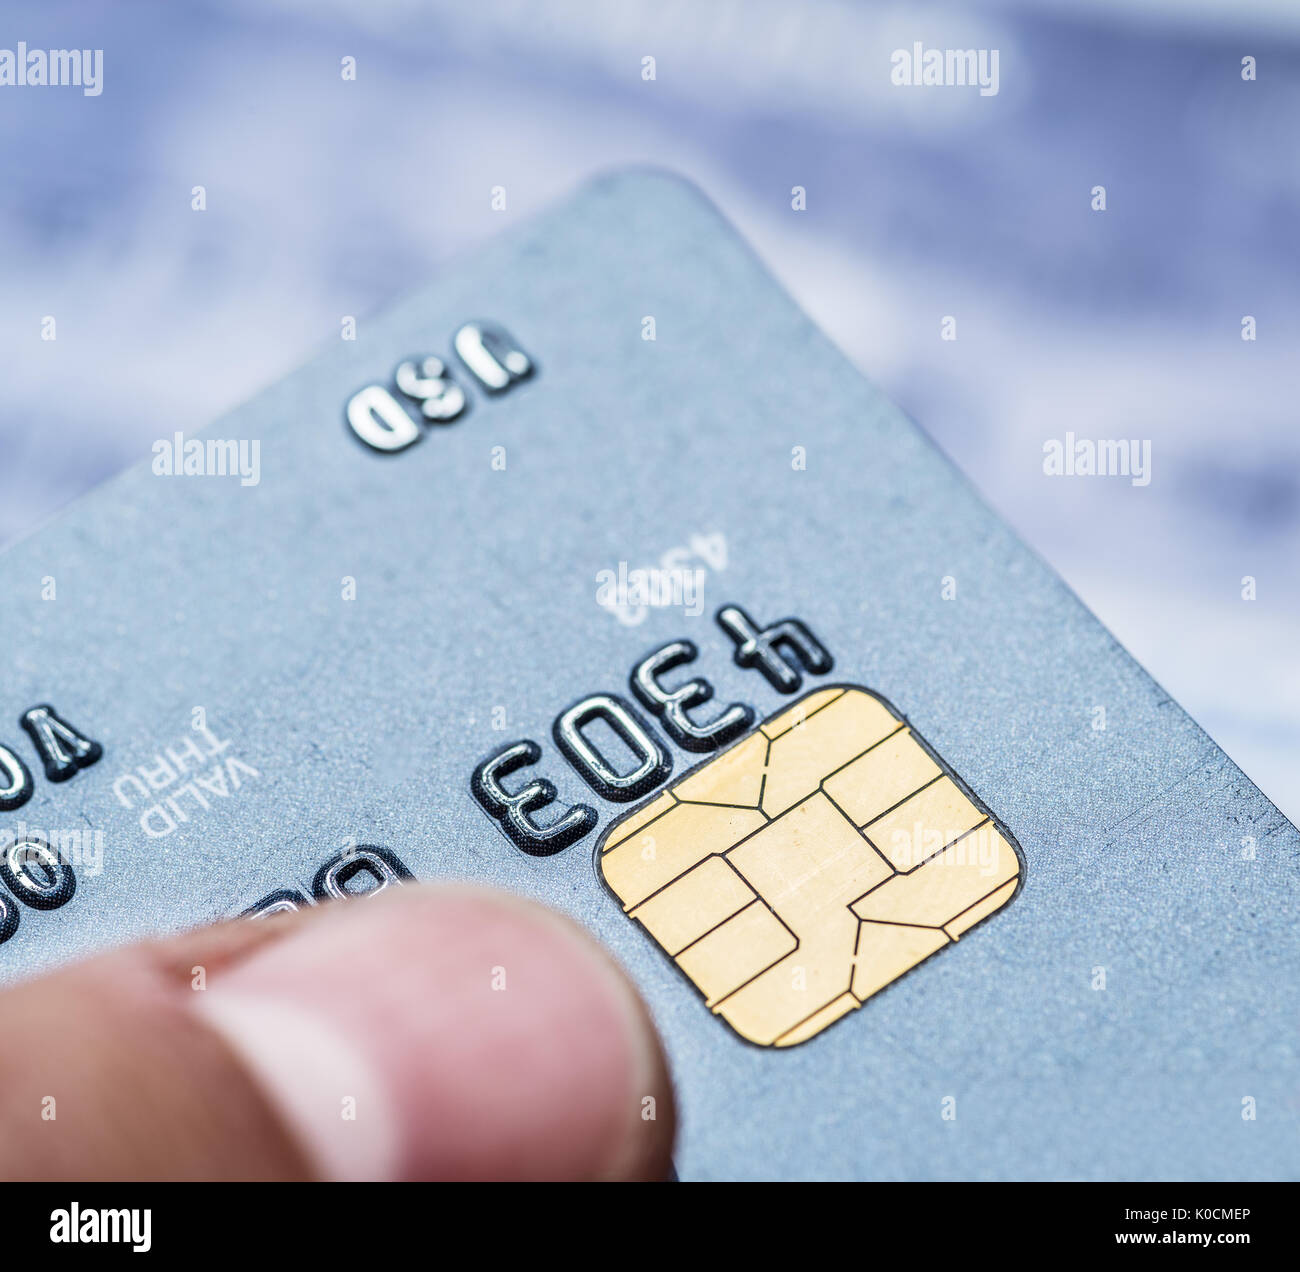 Credit cards. Financial business background. Stock Photo